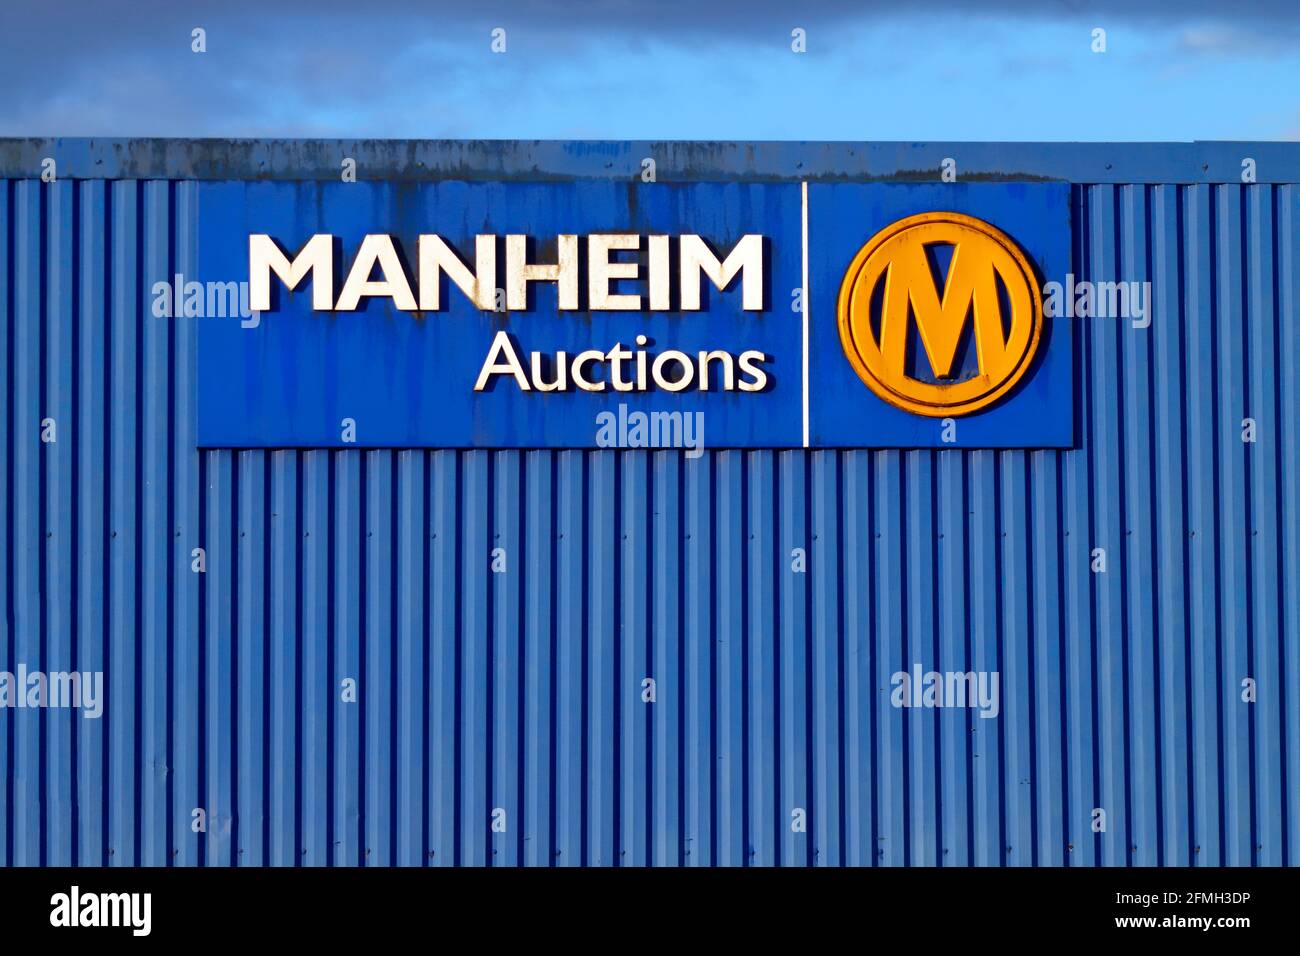 Manheim Auctions sign at the Rothwell depot Stock Photo